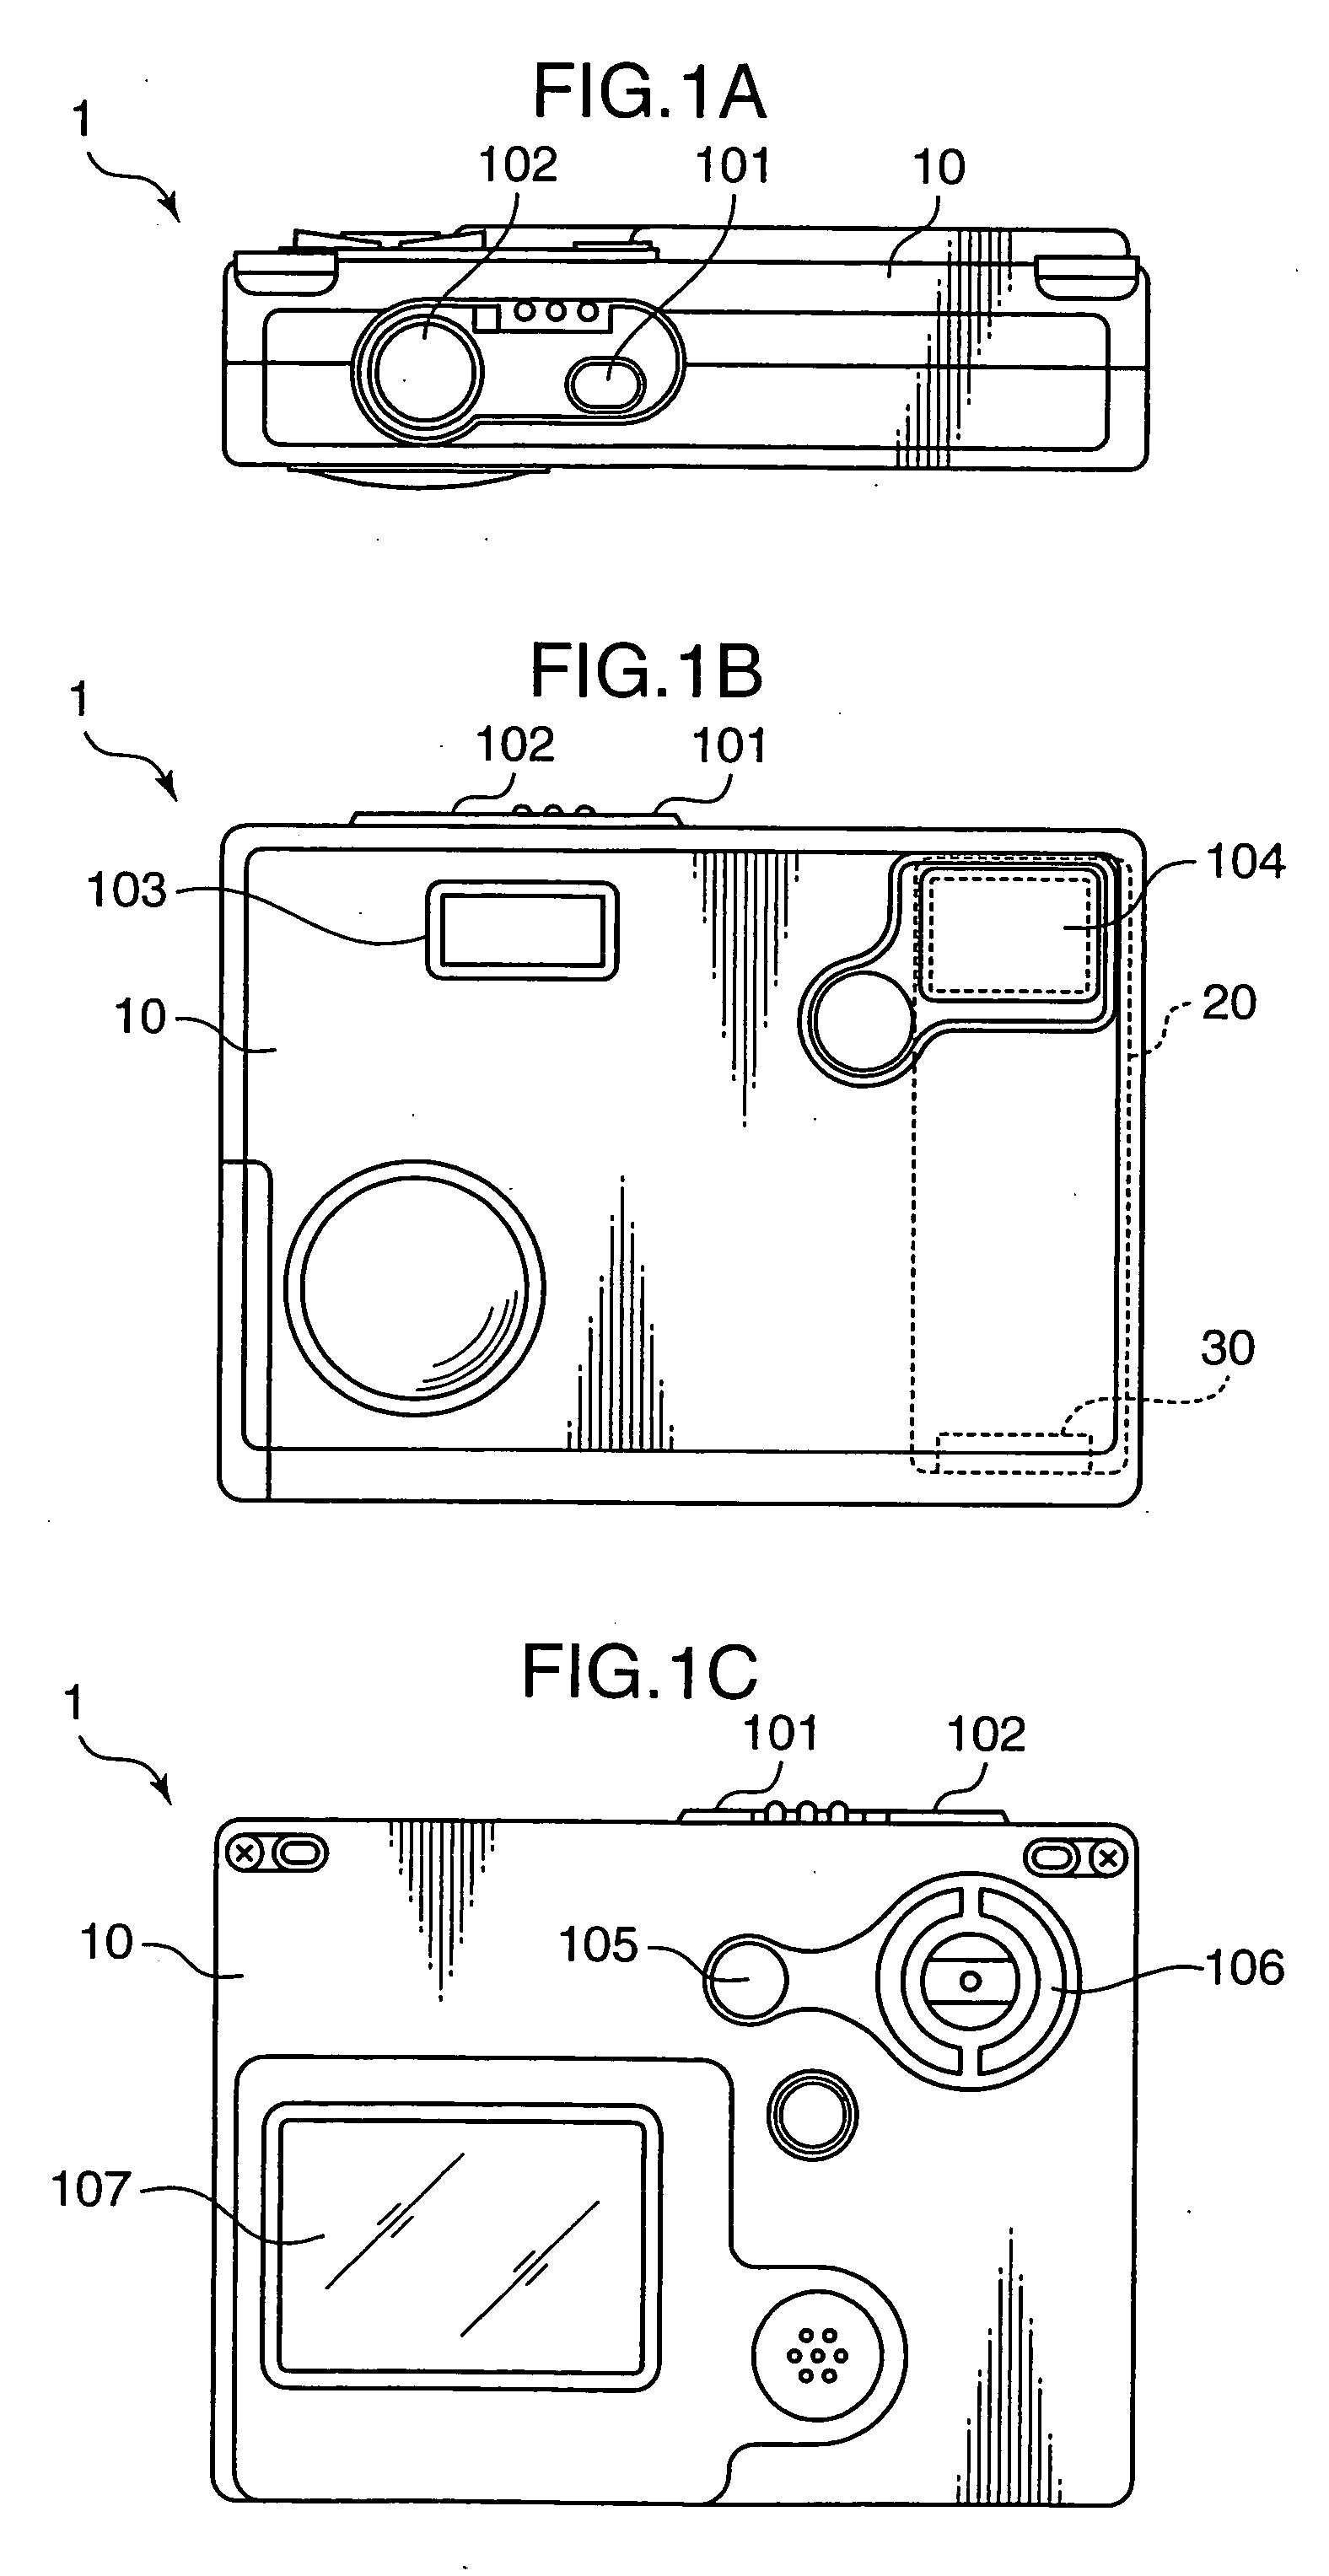 Image sensing apparatus and image processing method for use therein